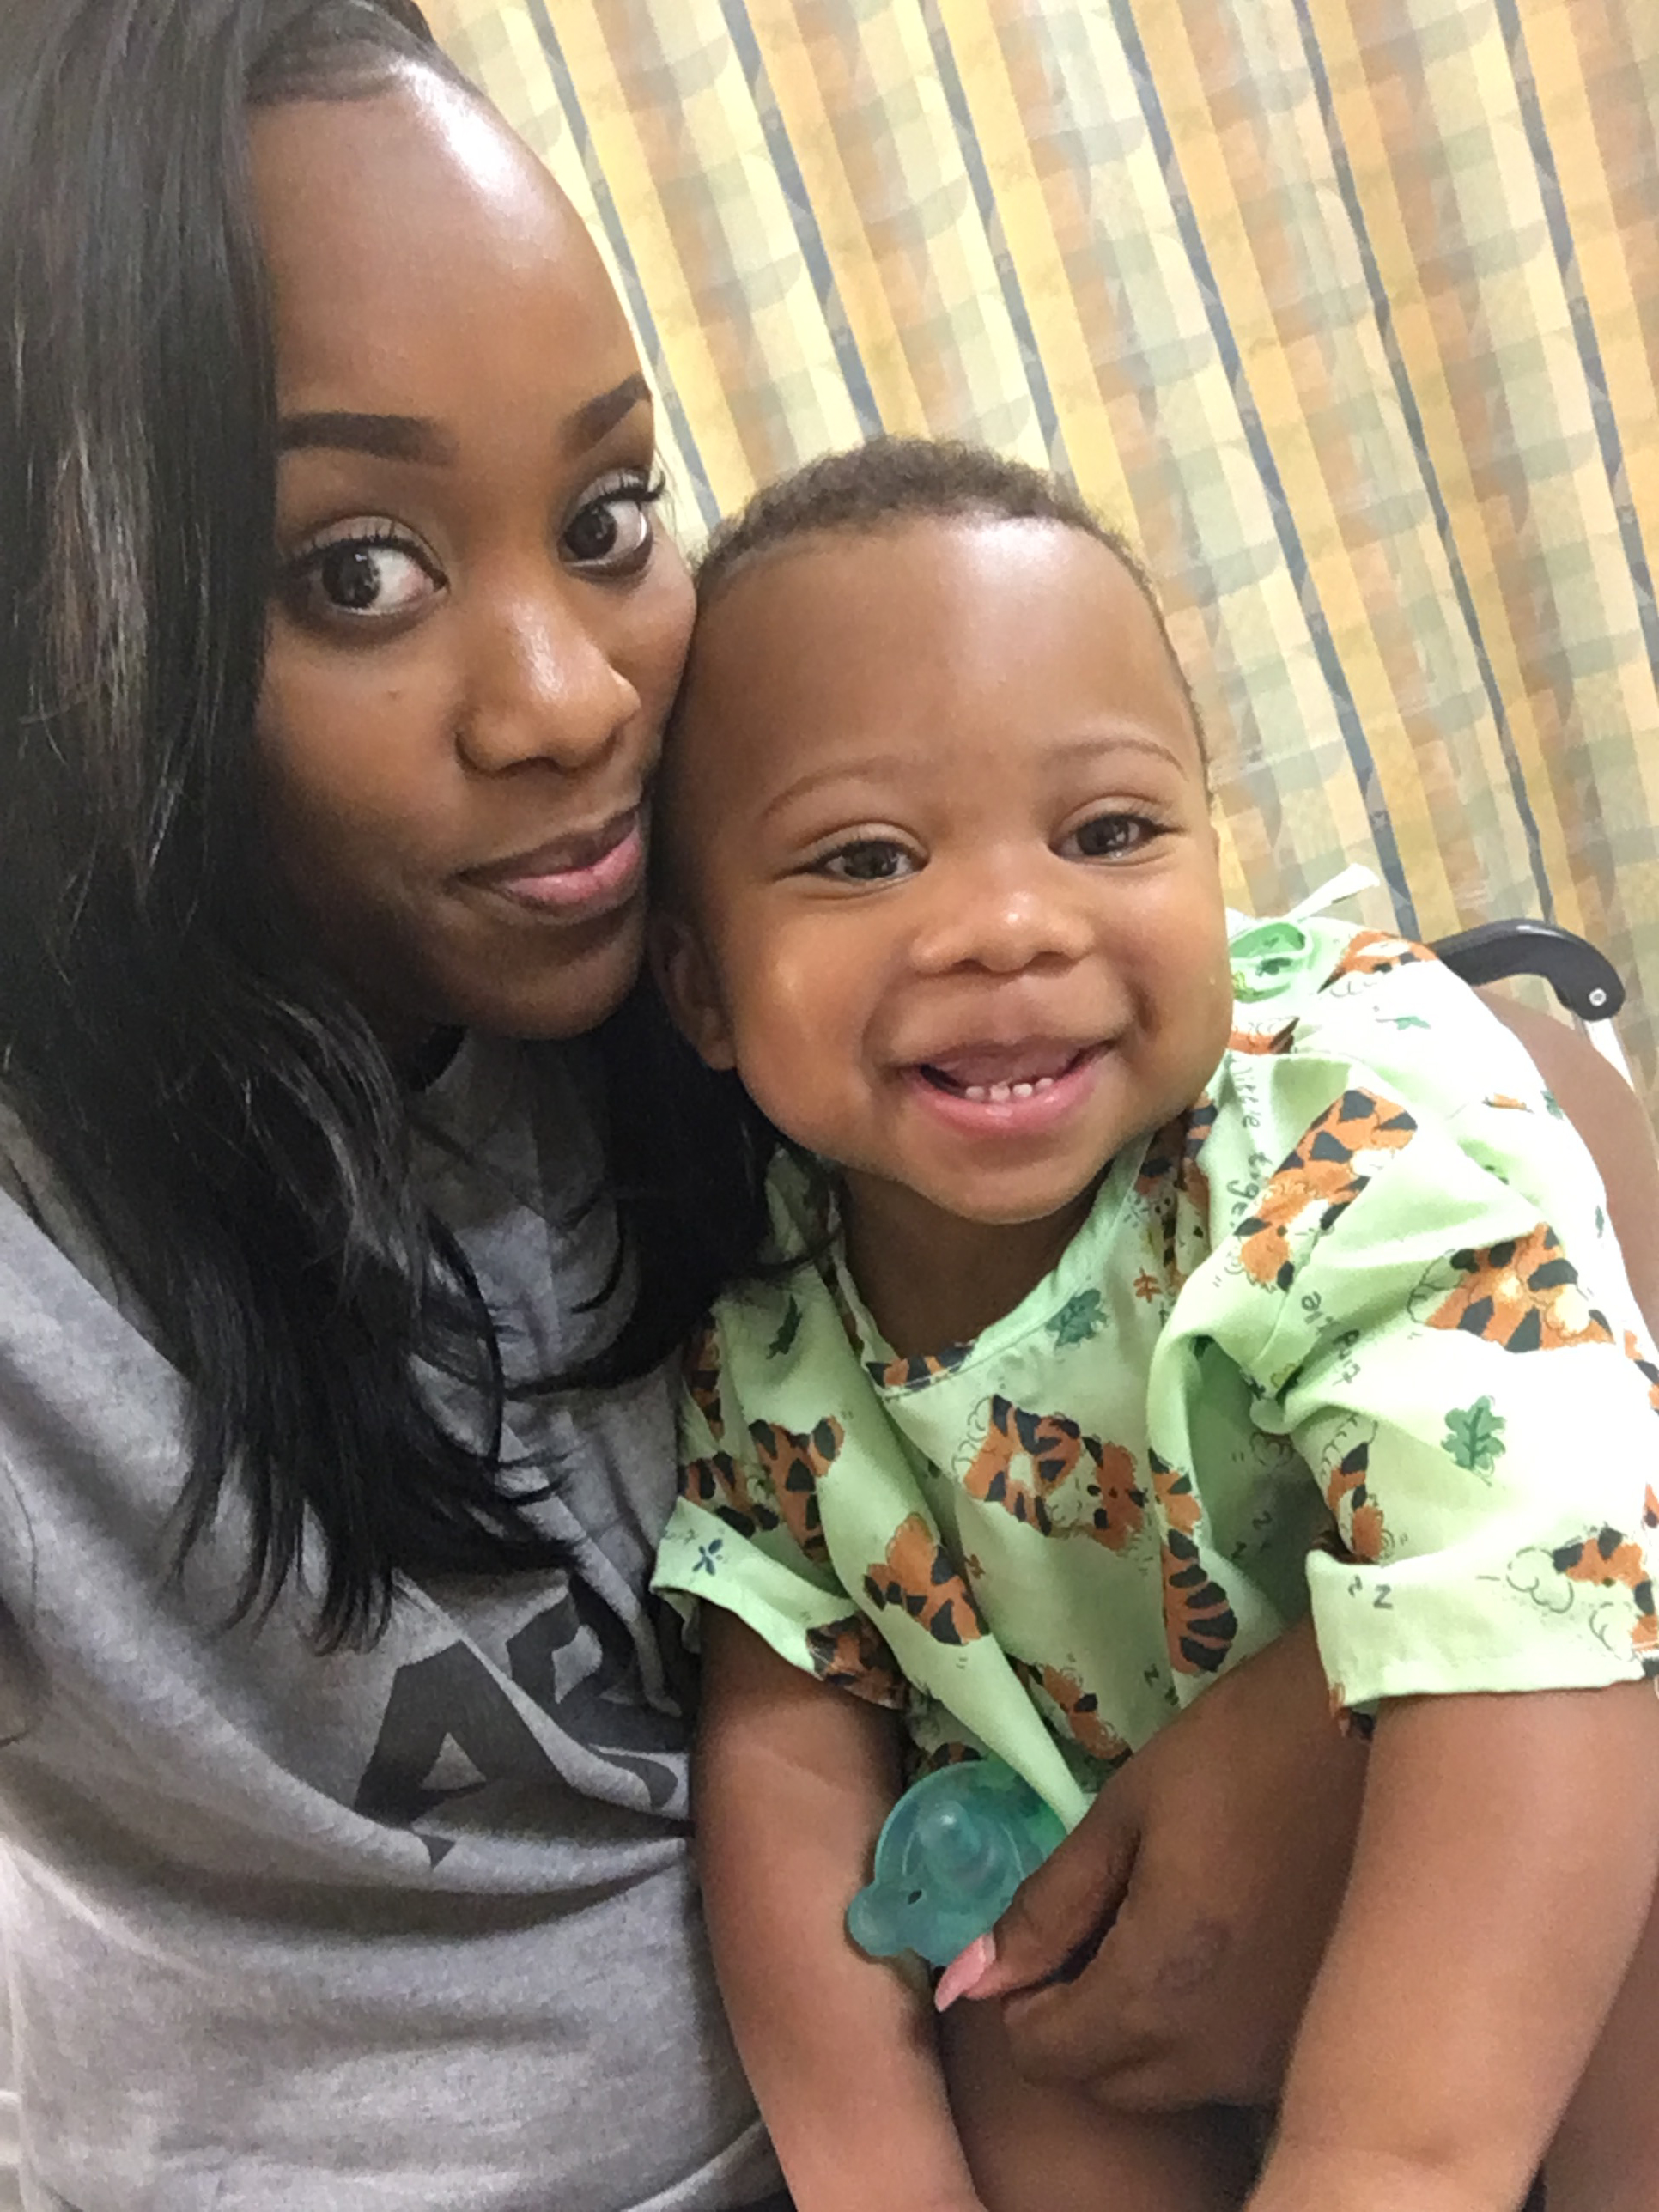 PHOTO: Kristian Washington with her 1-year-old Josiah Washington, who went viral for walking out of his stroller in a hilarious Facebook video.